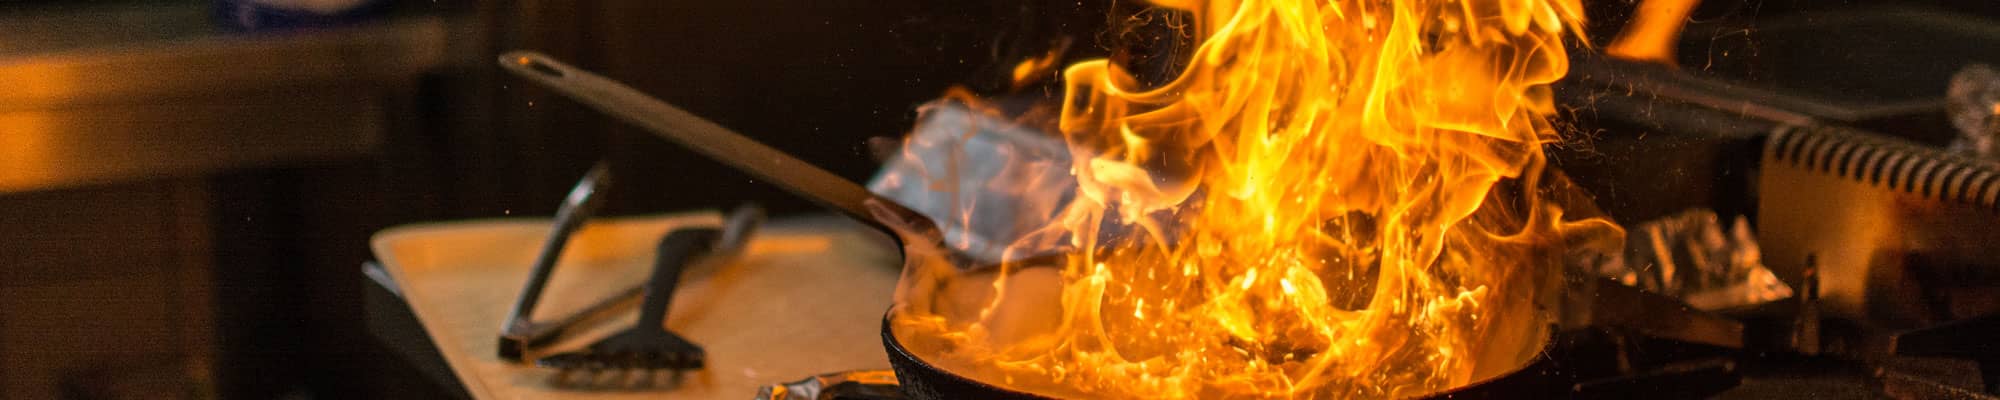 Frying pan on fire at Chester business